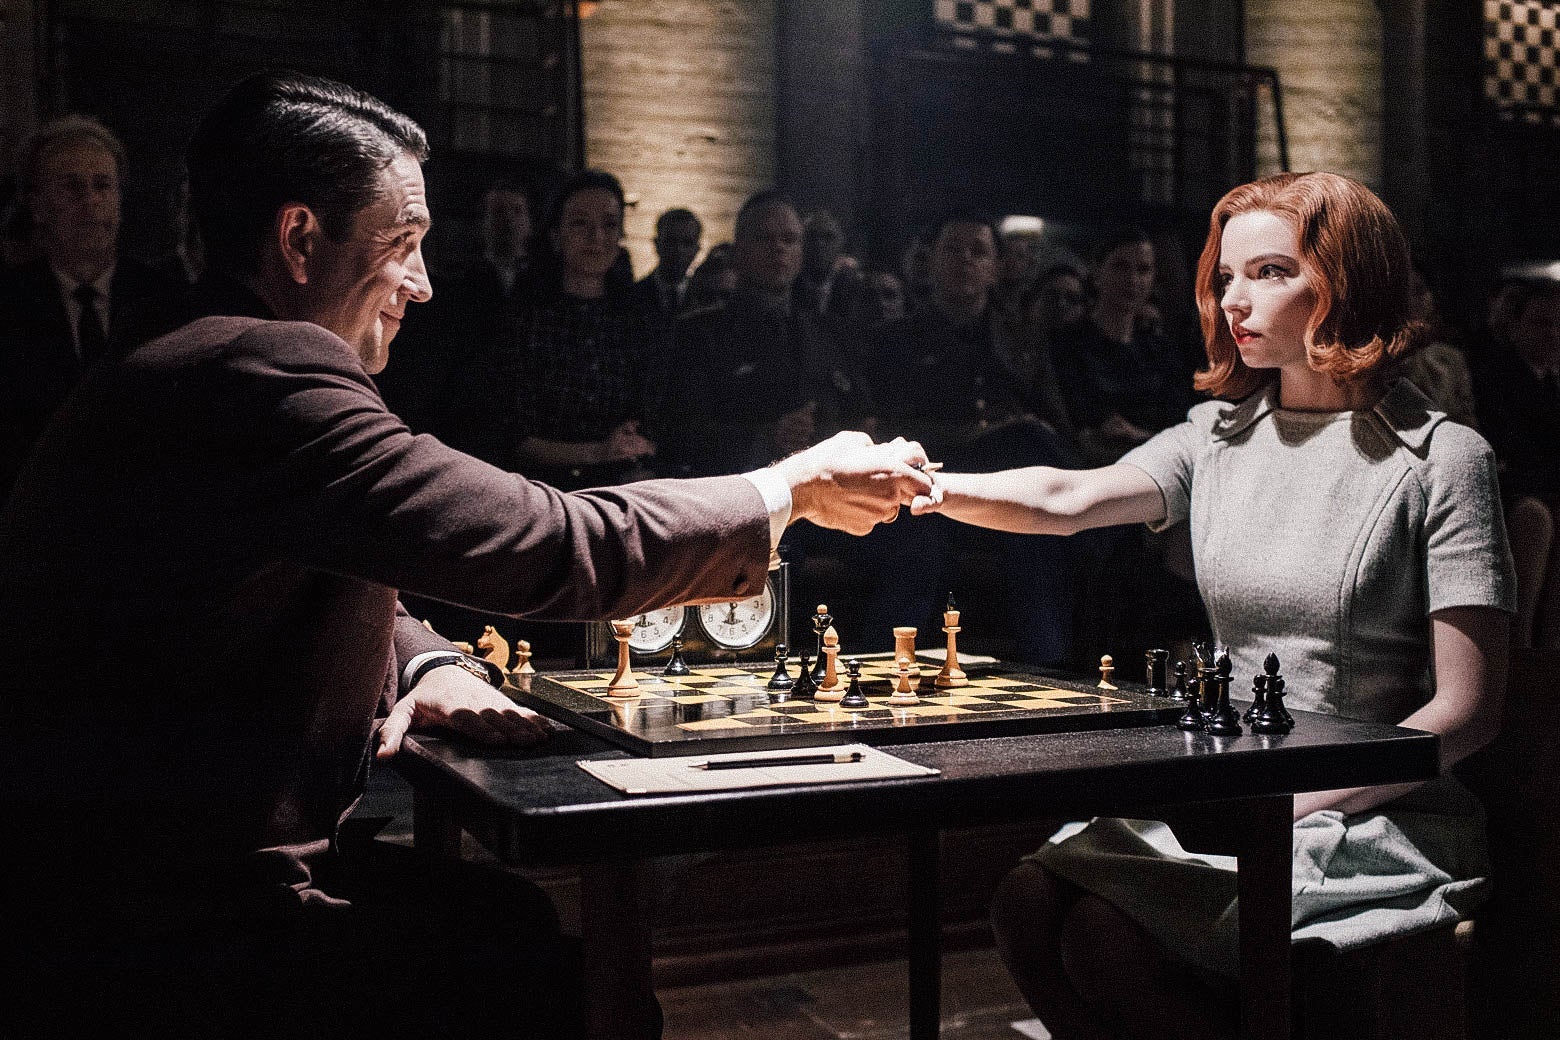 Why are men ranked higher in chess than women? It has to do with